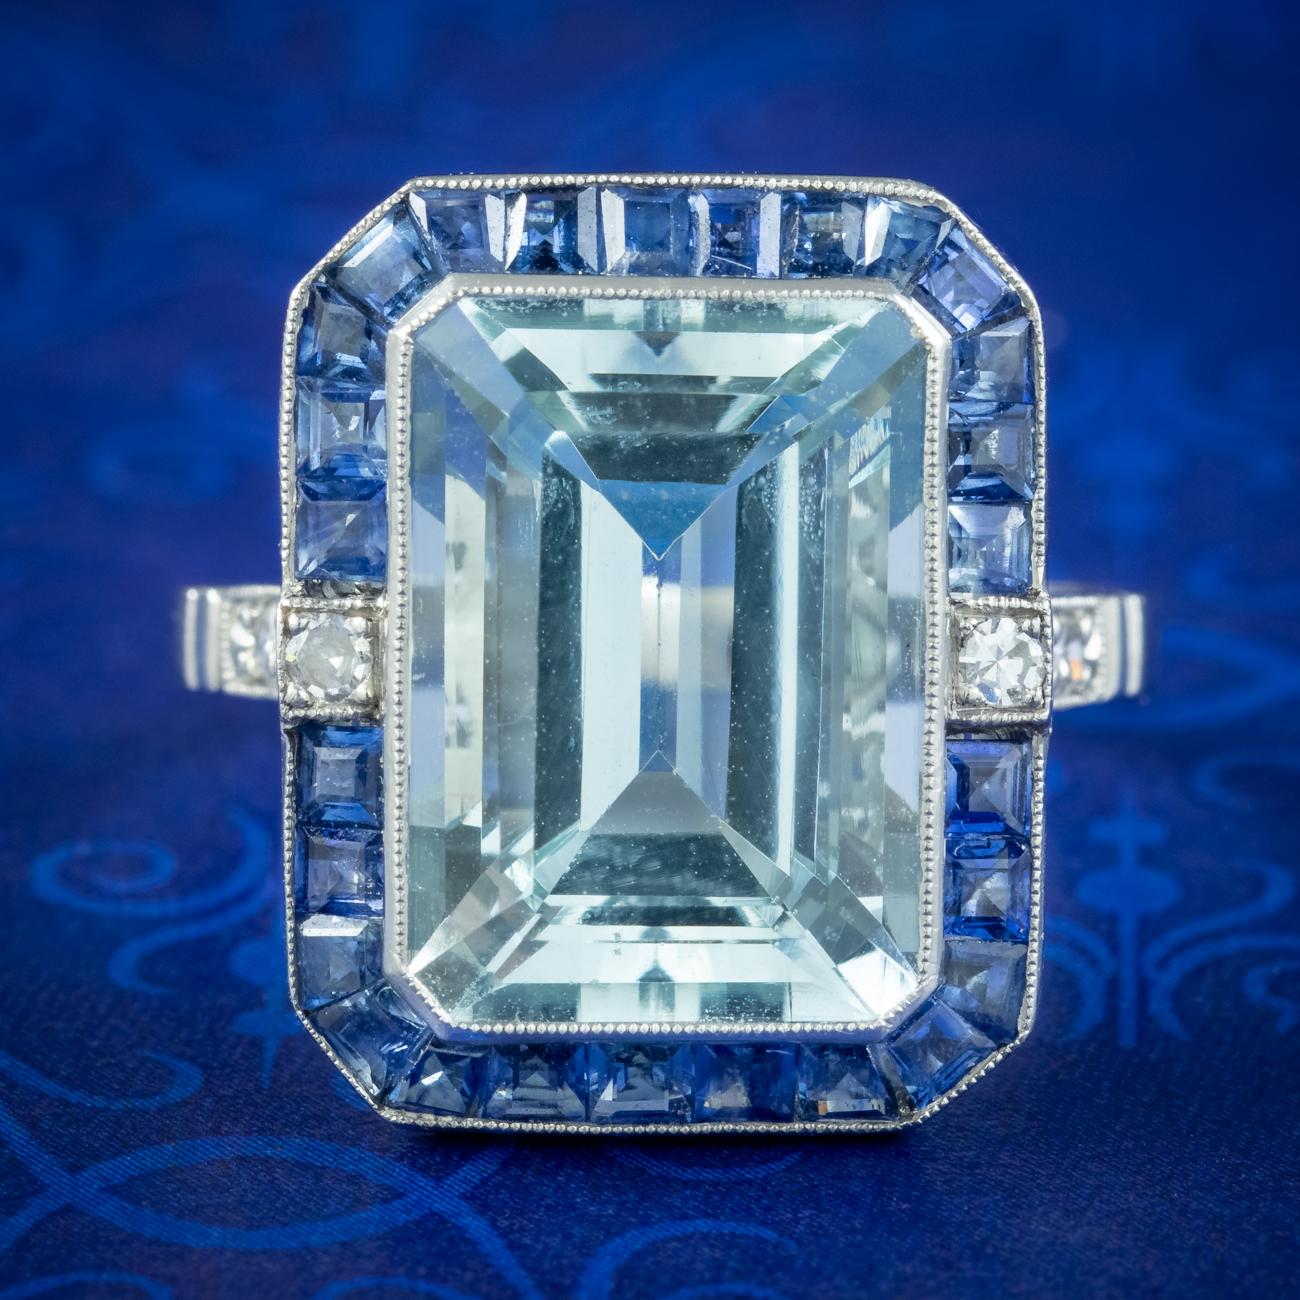 A magnificent Art Deco inspired cocktail ring built around a marvellous emerald cut aquamarine weighed at 7.29 carats. It has a clear glacier-blue hue and is bezel set in a frame of calibre set square cut sapphires (approx. 2.1ct) with diamonds on